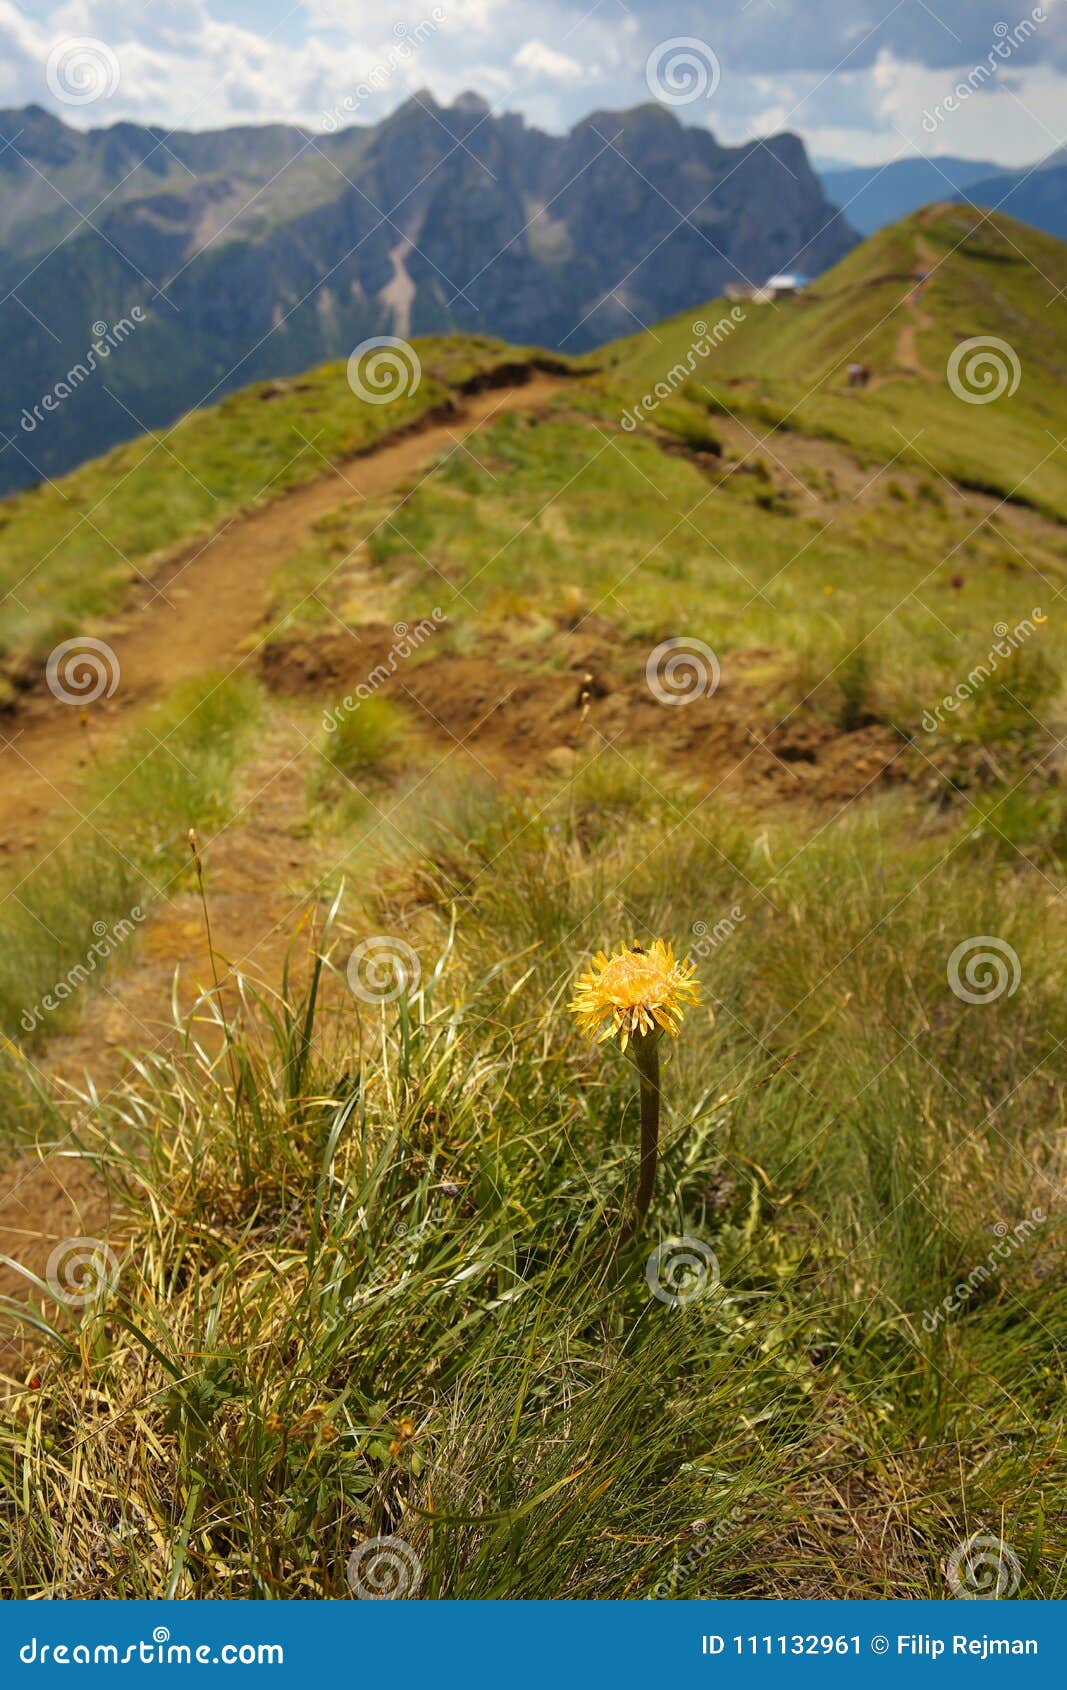 yellow coltsfood with mountains on the background